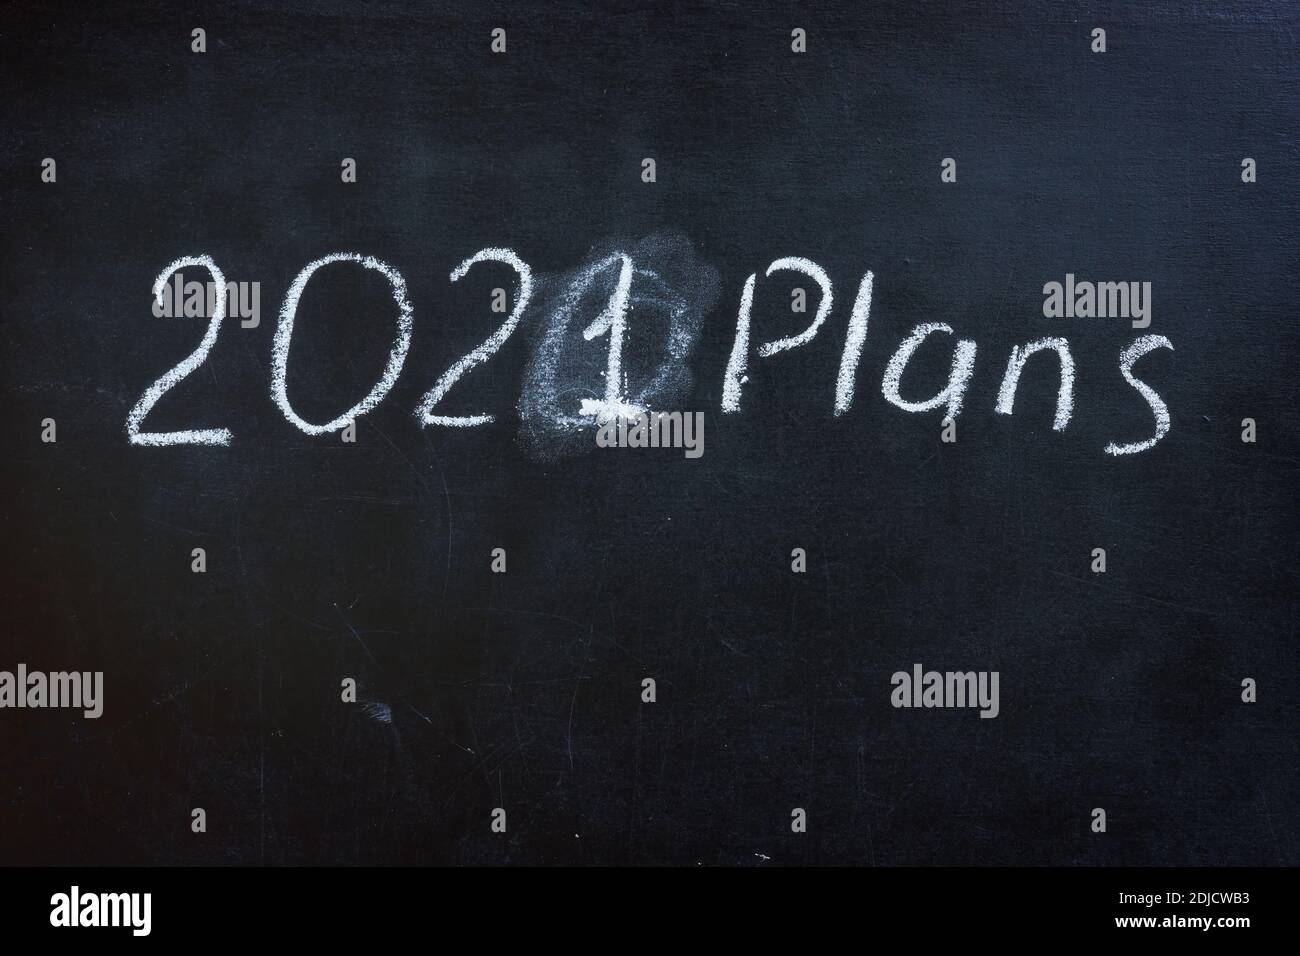 2020 plans erased inscription and written 2021 plans on the blackboard. Stock Photo